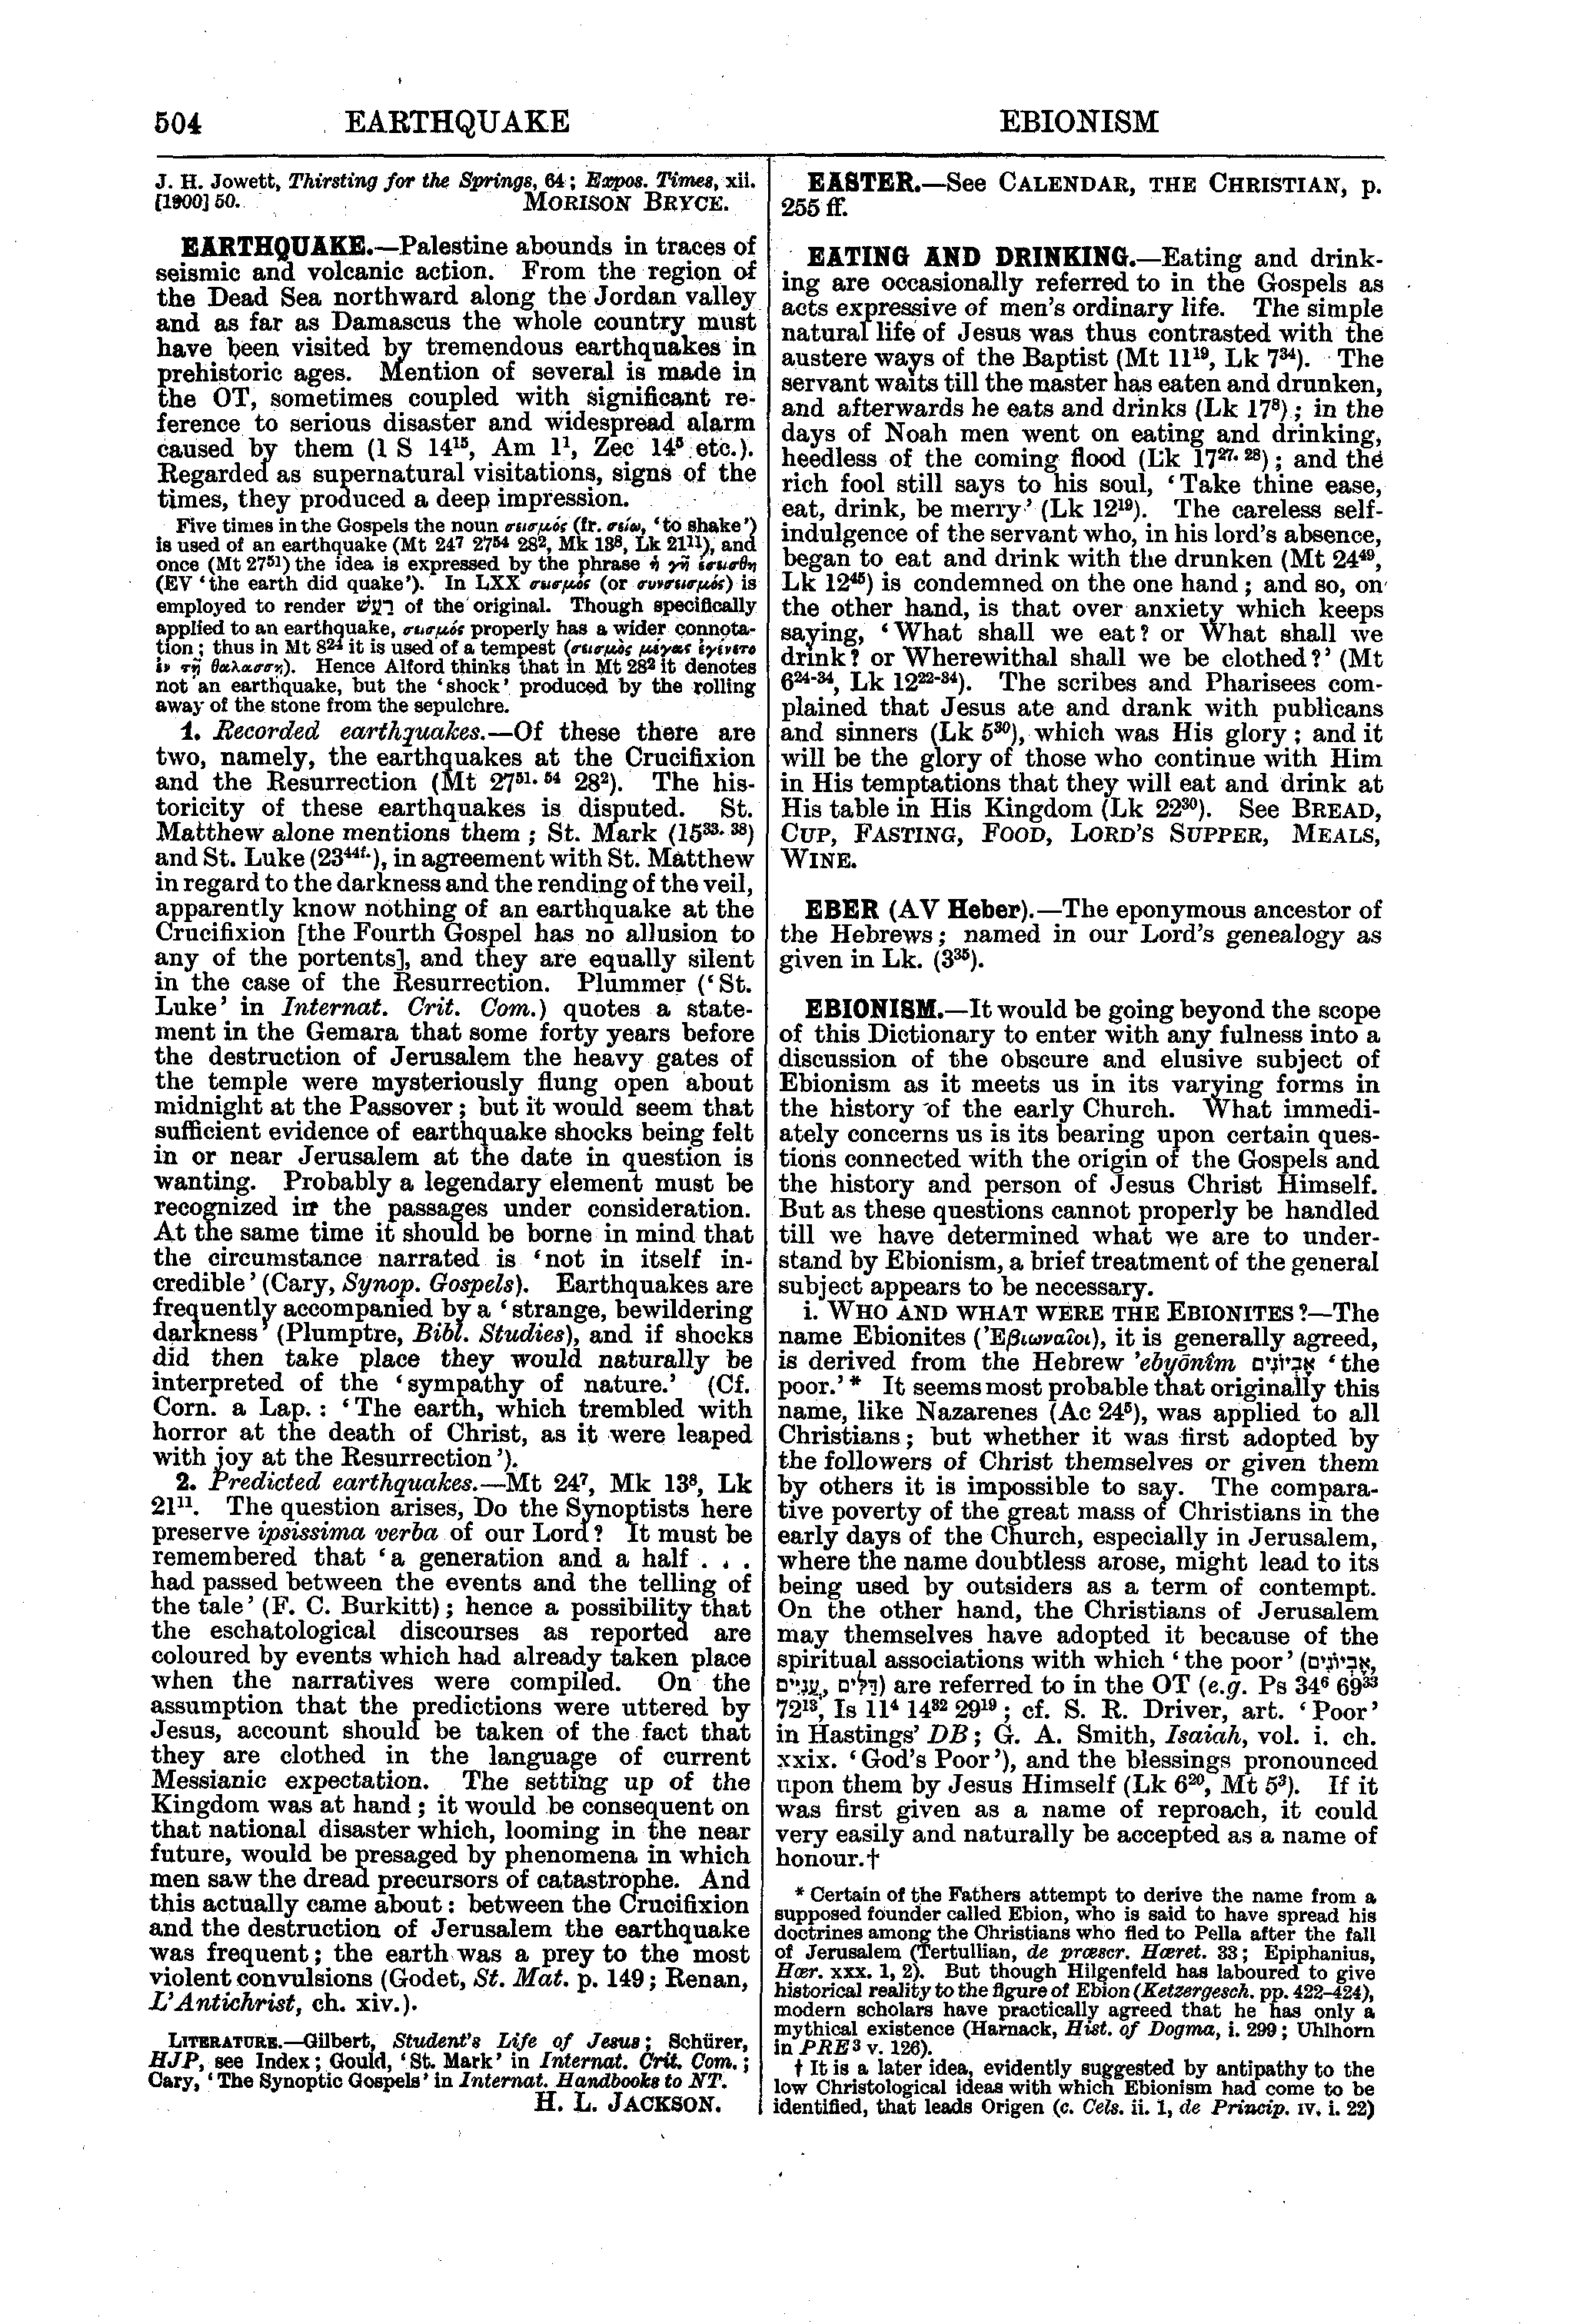 Image of page 504